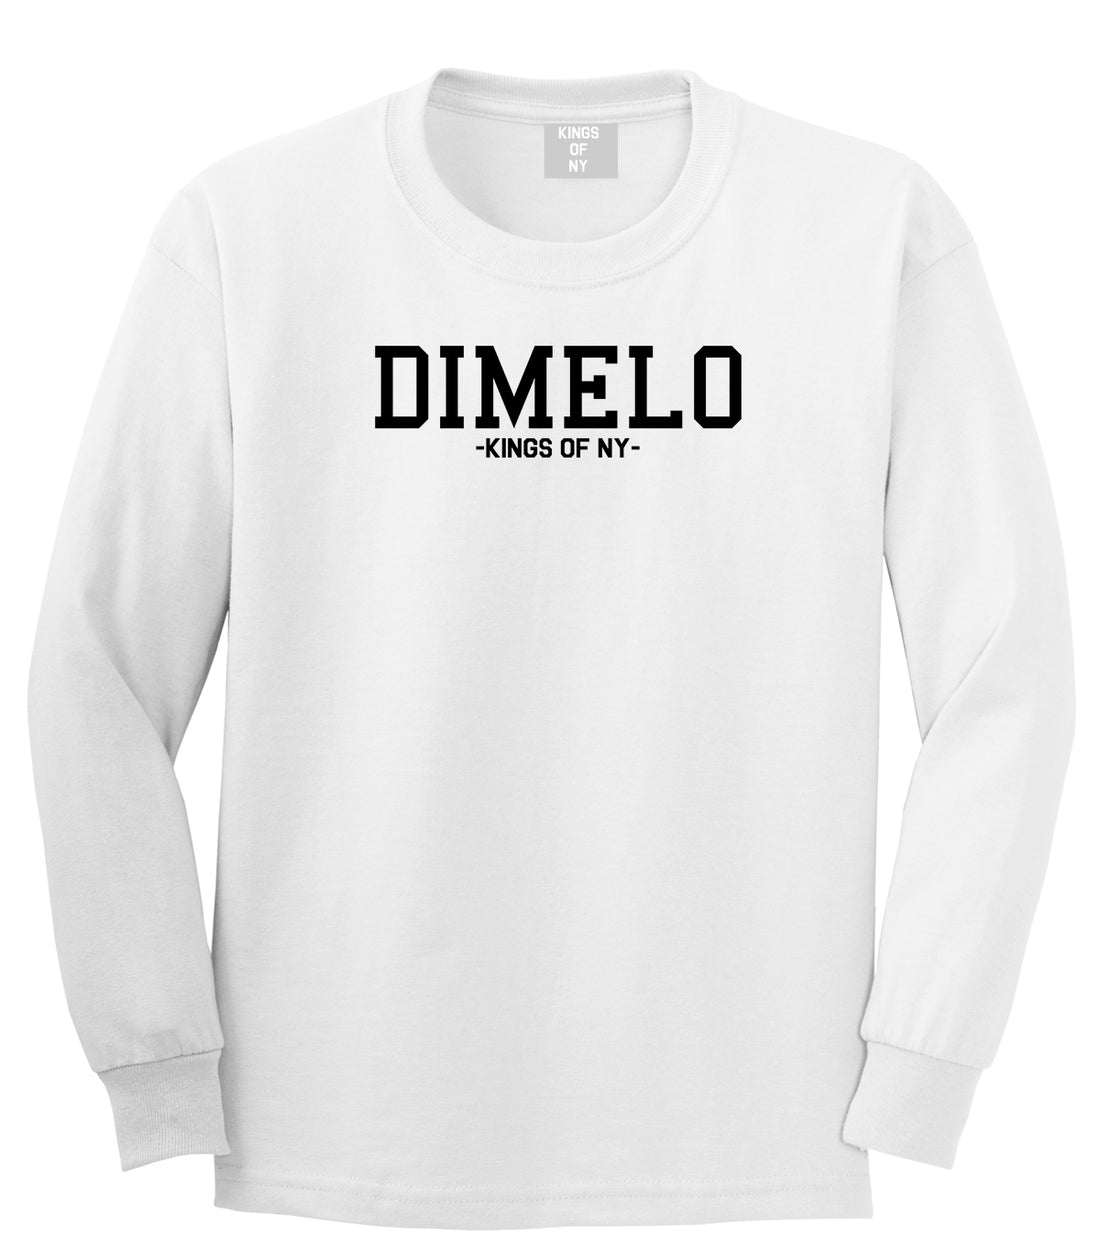 Dimelo Kings Of NY Long Sleeve T-Shirt in White